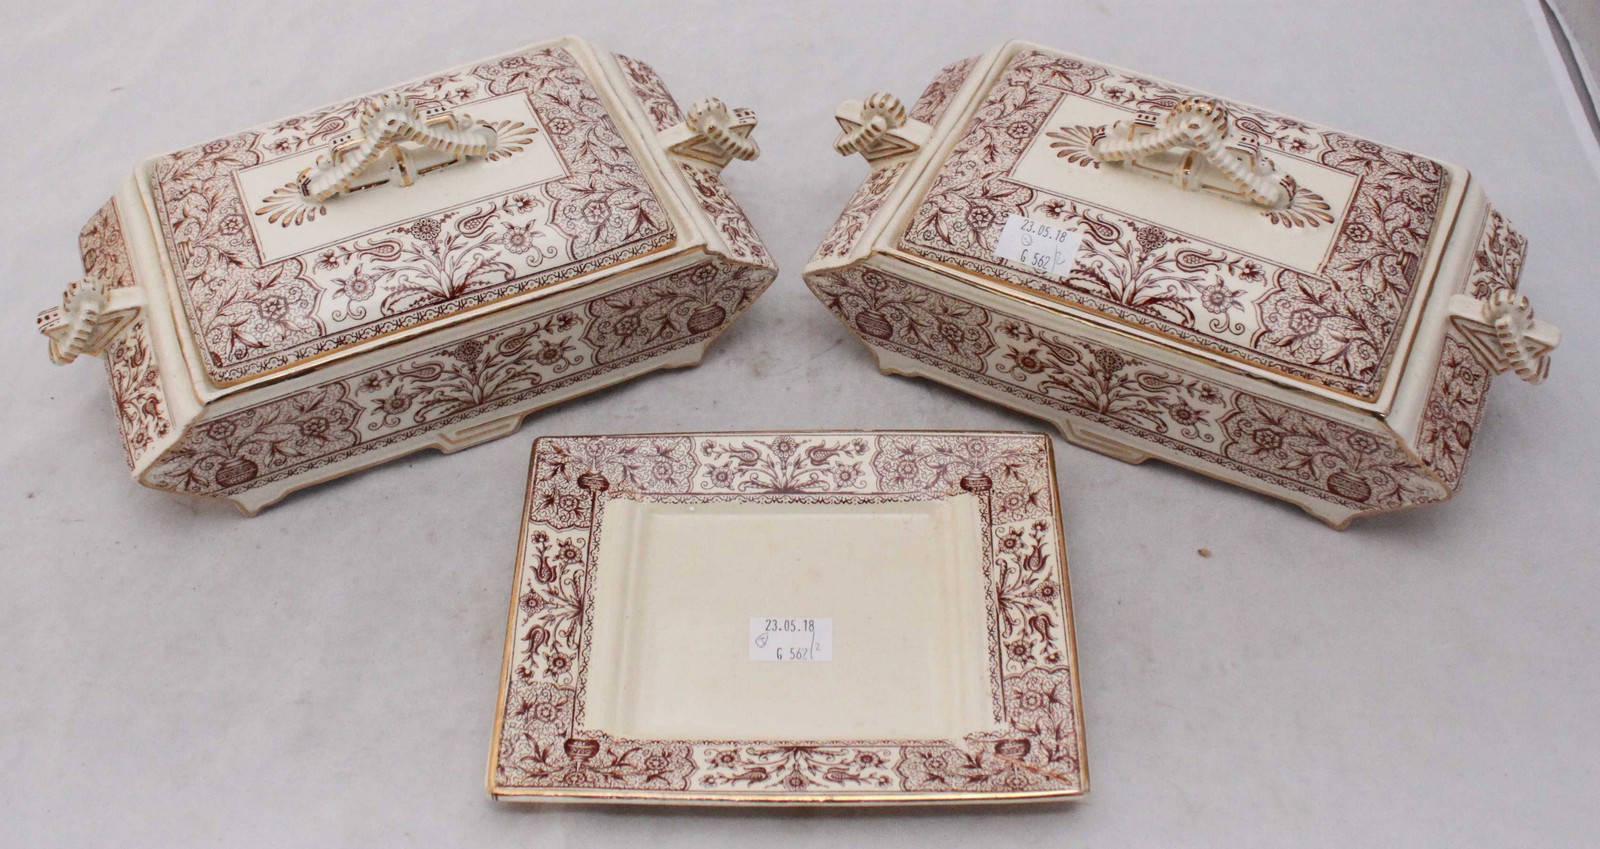 A pair of Christopher Dresser designed Old Hall Earthenware vegetable dishes and covers, together